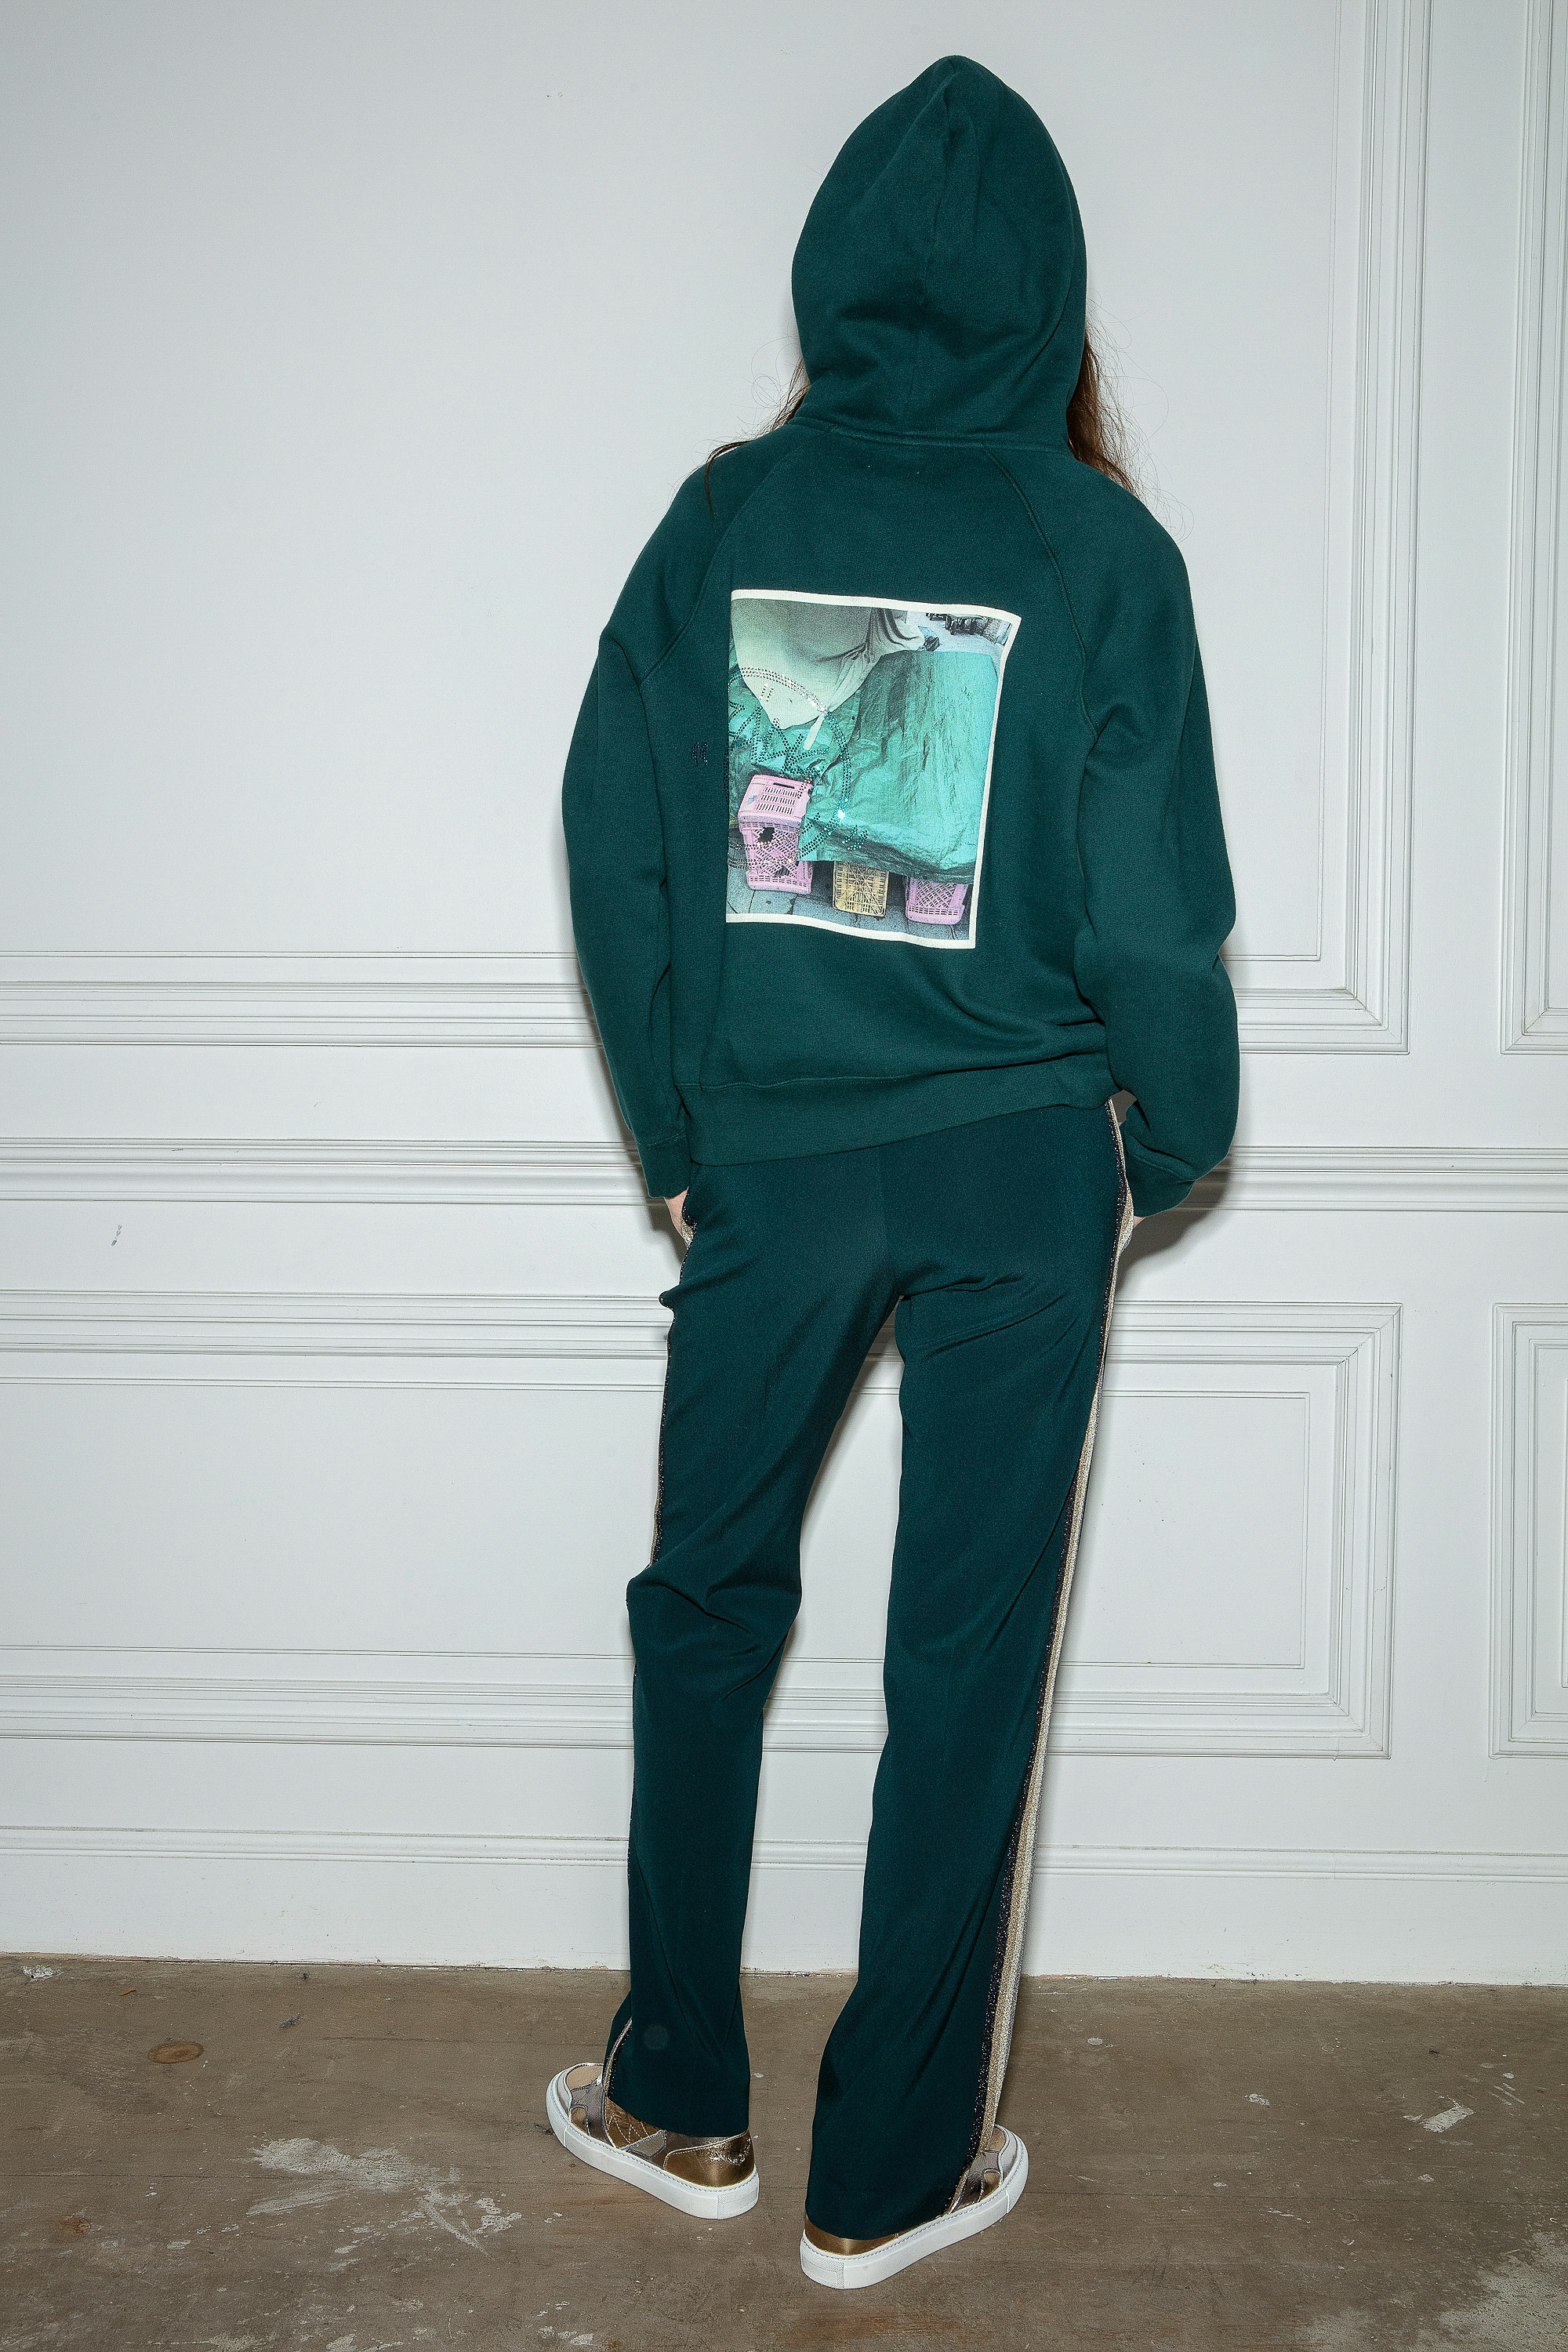 Georgy フォトプリントスウェット Women’s green cotton sweatshirt with photoprint and diamanté on the back